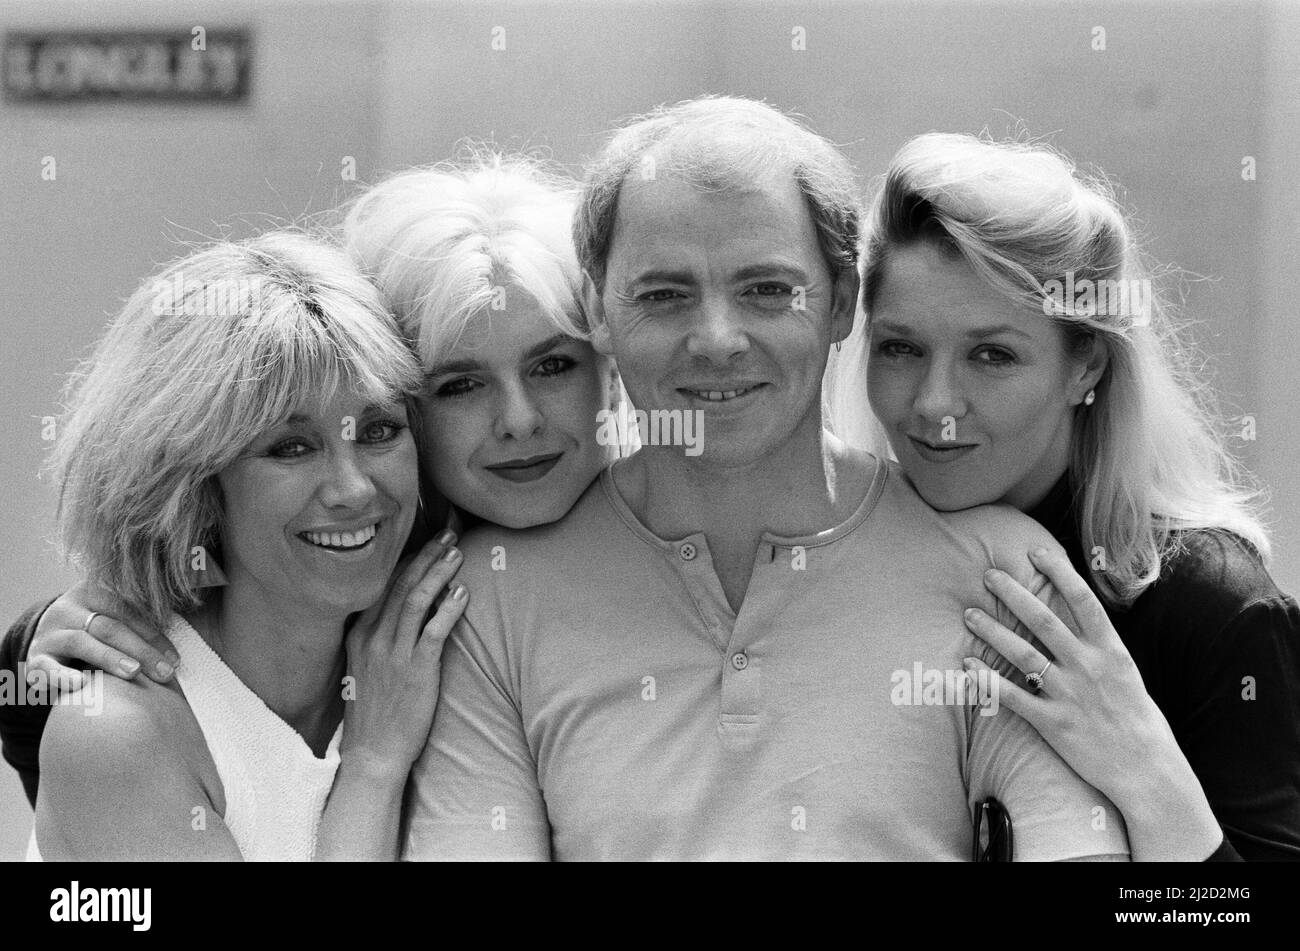 Scottish singer Jim Diamond pictured with his backing group, Vicki and Sam Brown, wife and daughter of Joe Brown and Sonia Jones. Pictured, left to right, Vicki Brown, Sam Brown, Jim Diamond and Sonia Jones. 16th May 1985. Stock Photo